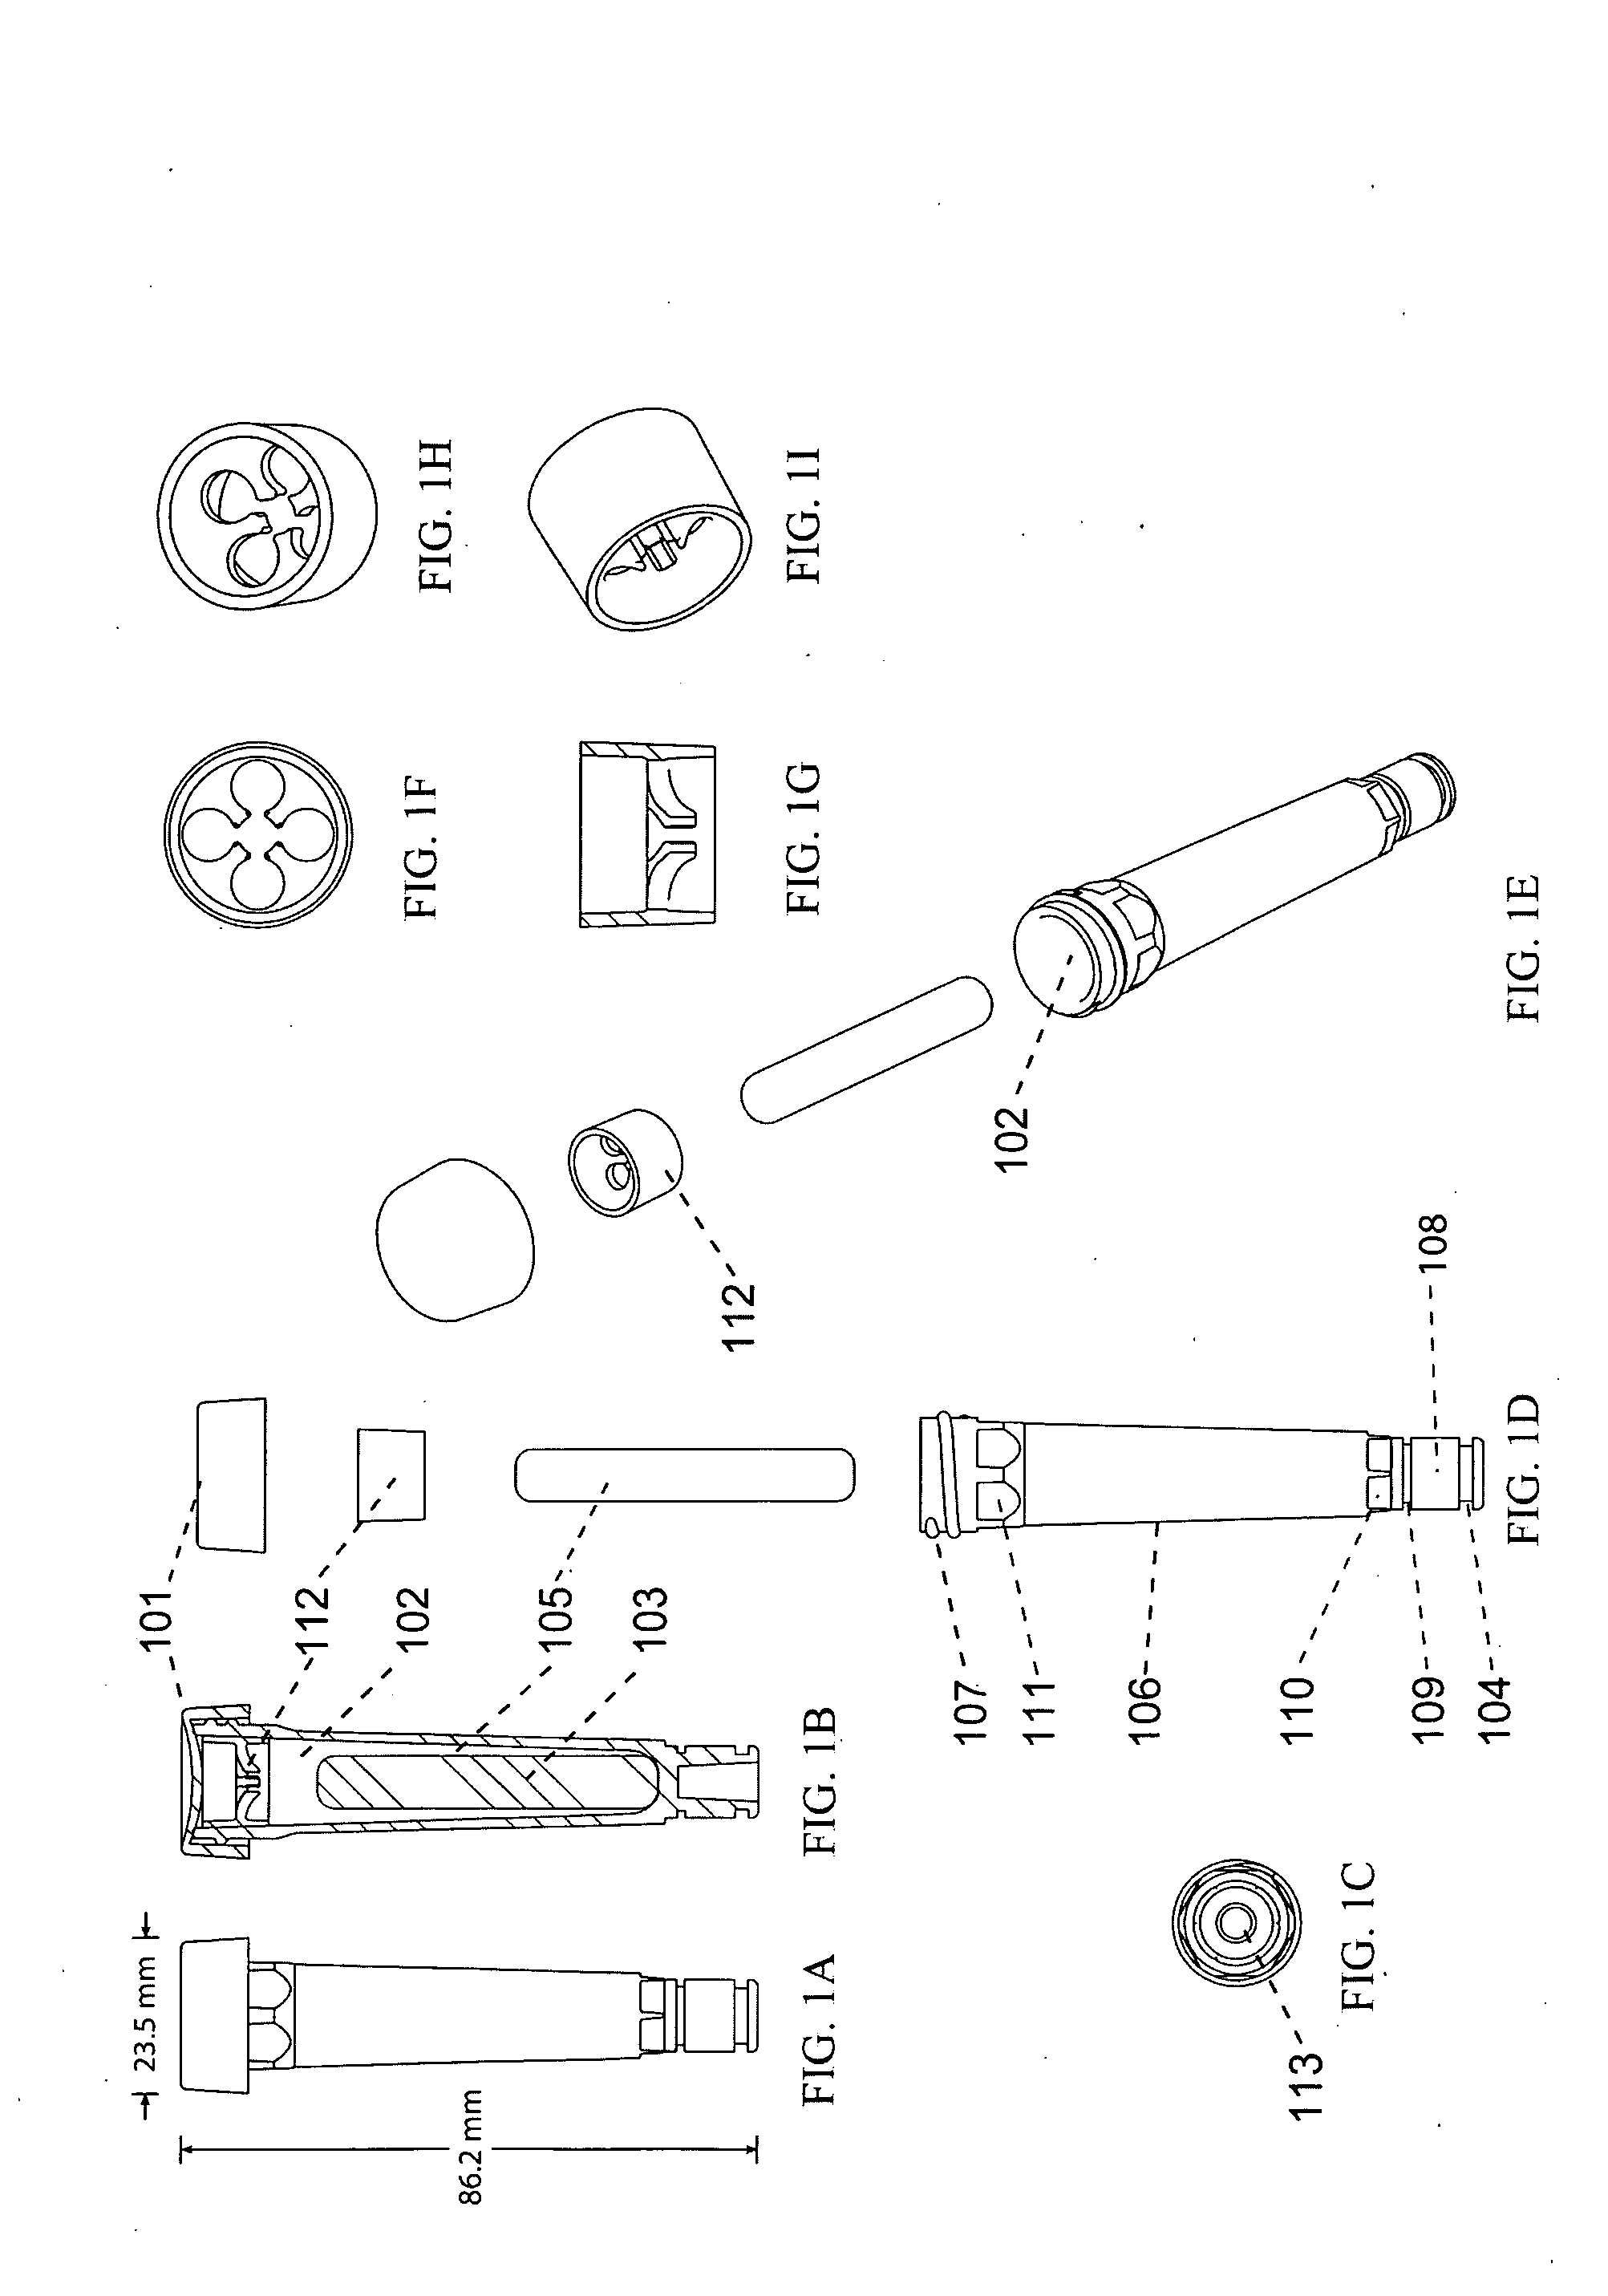 Devices, systems and methods for the collection, stimulation, stabilization, and analysis of a biological sample